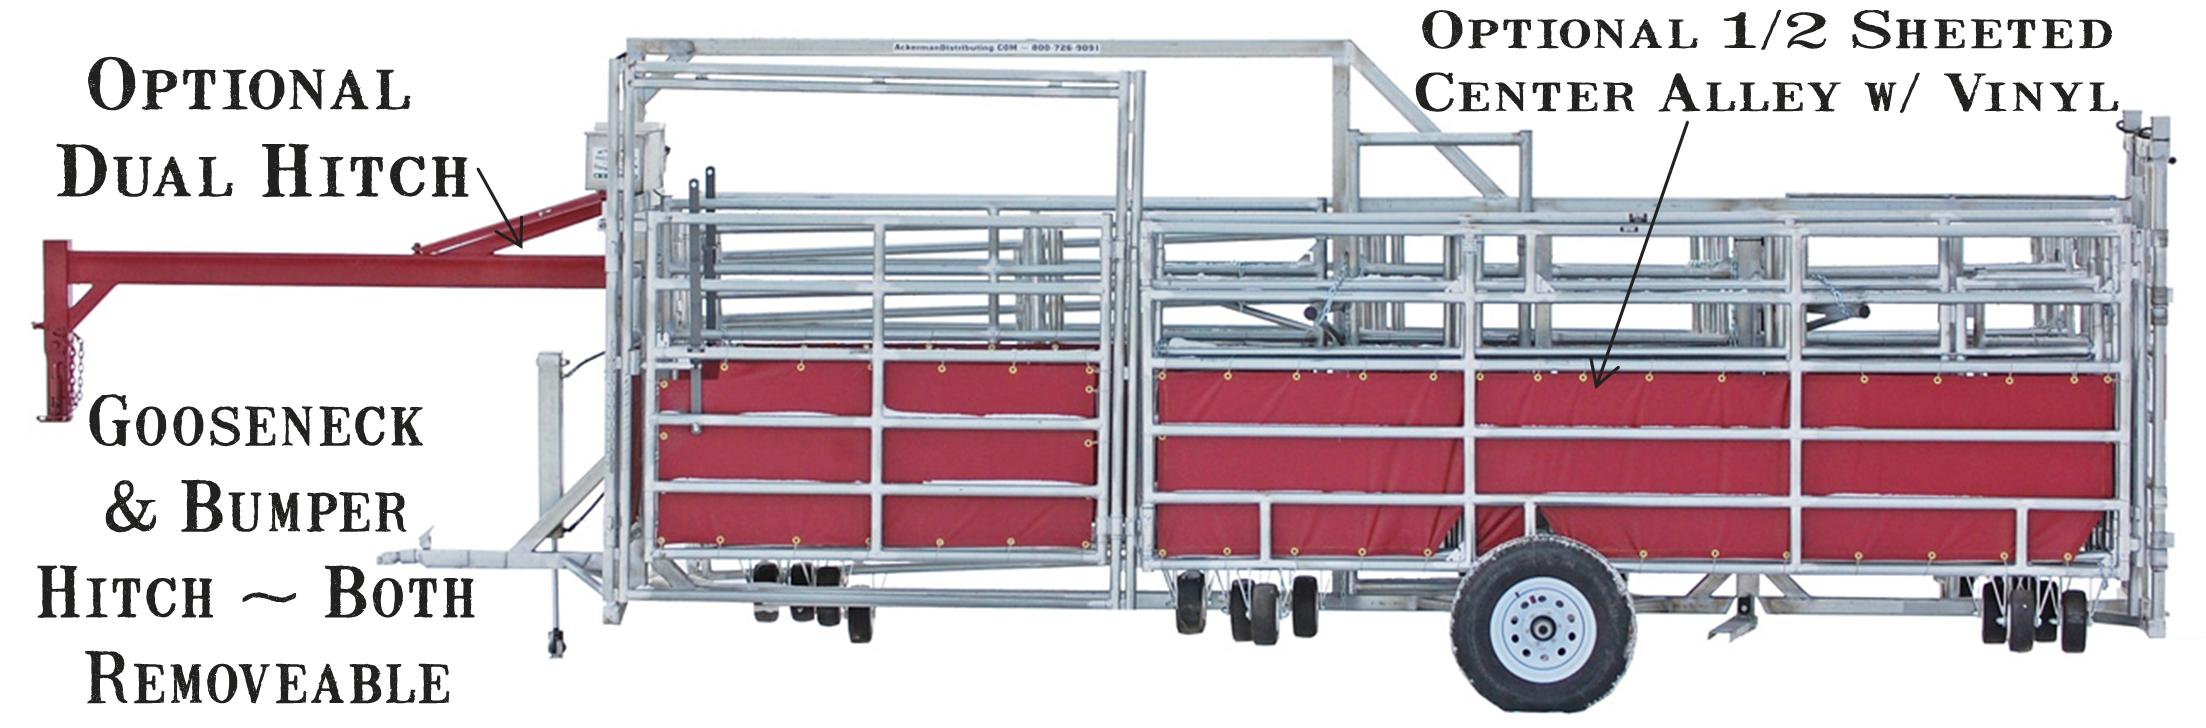 WW Express Portable Cattle Corral